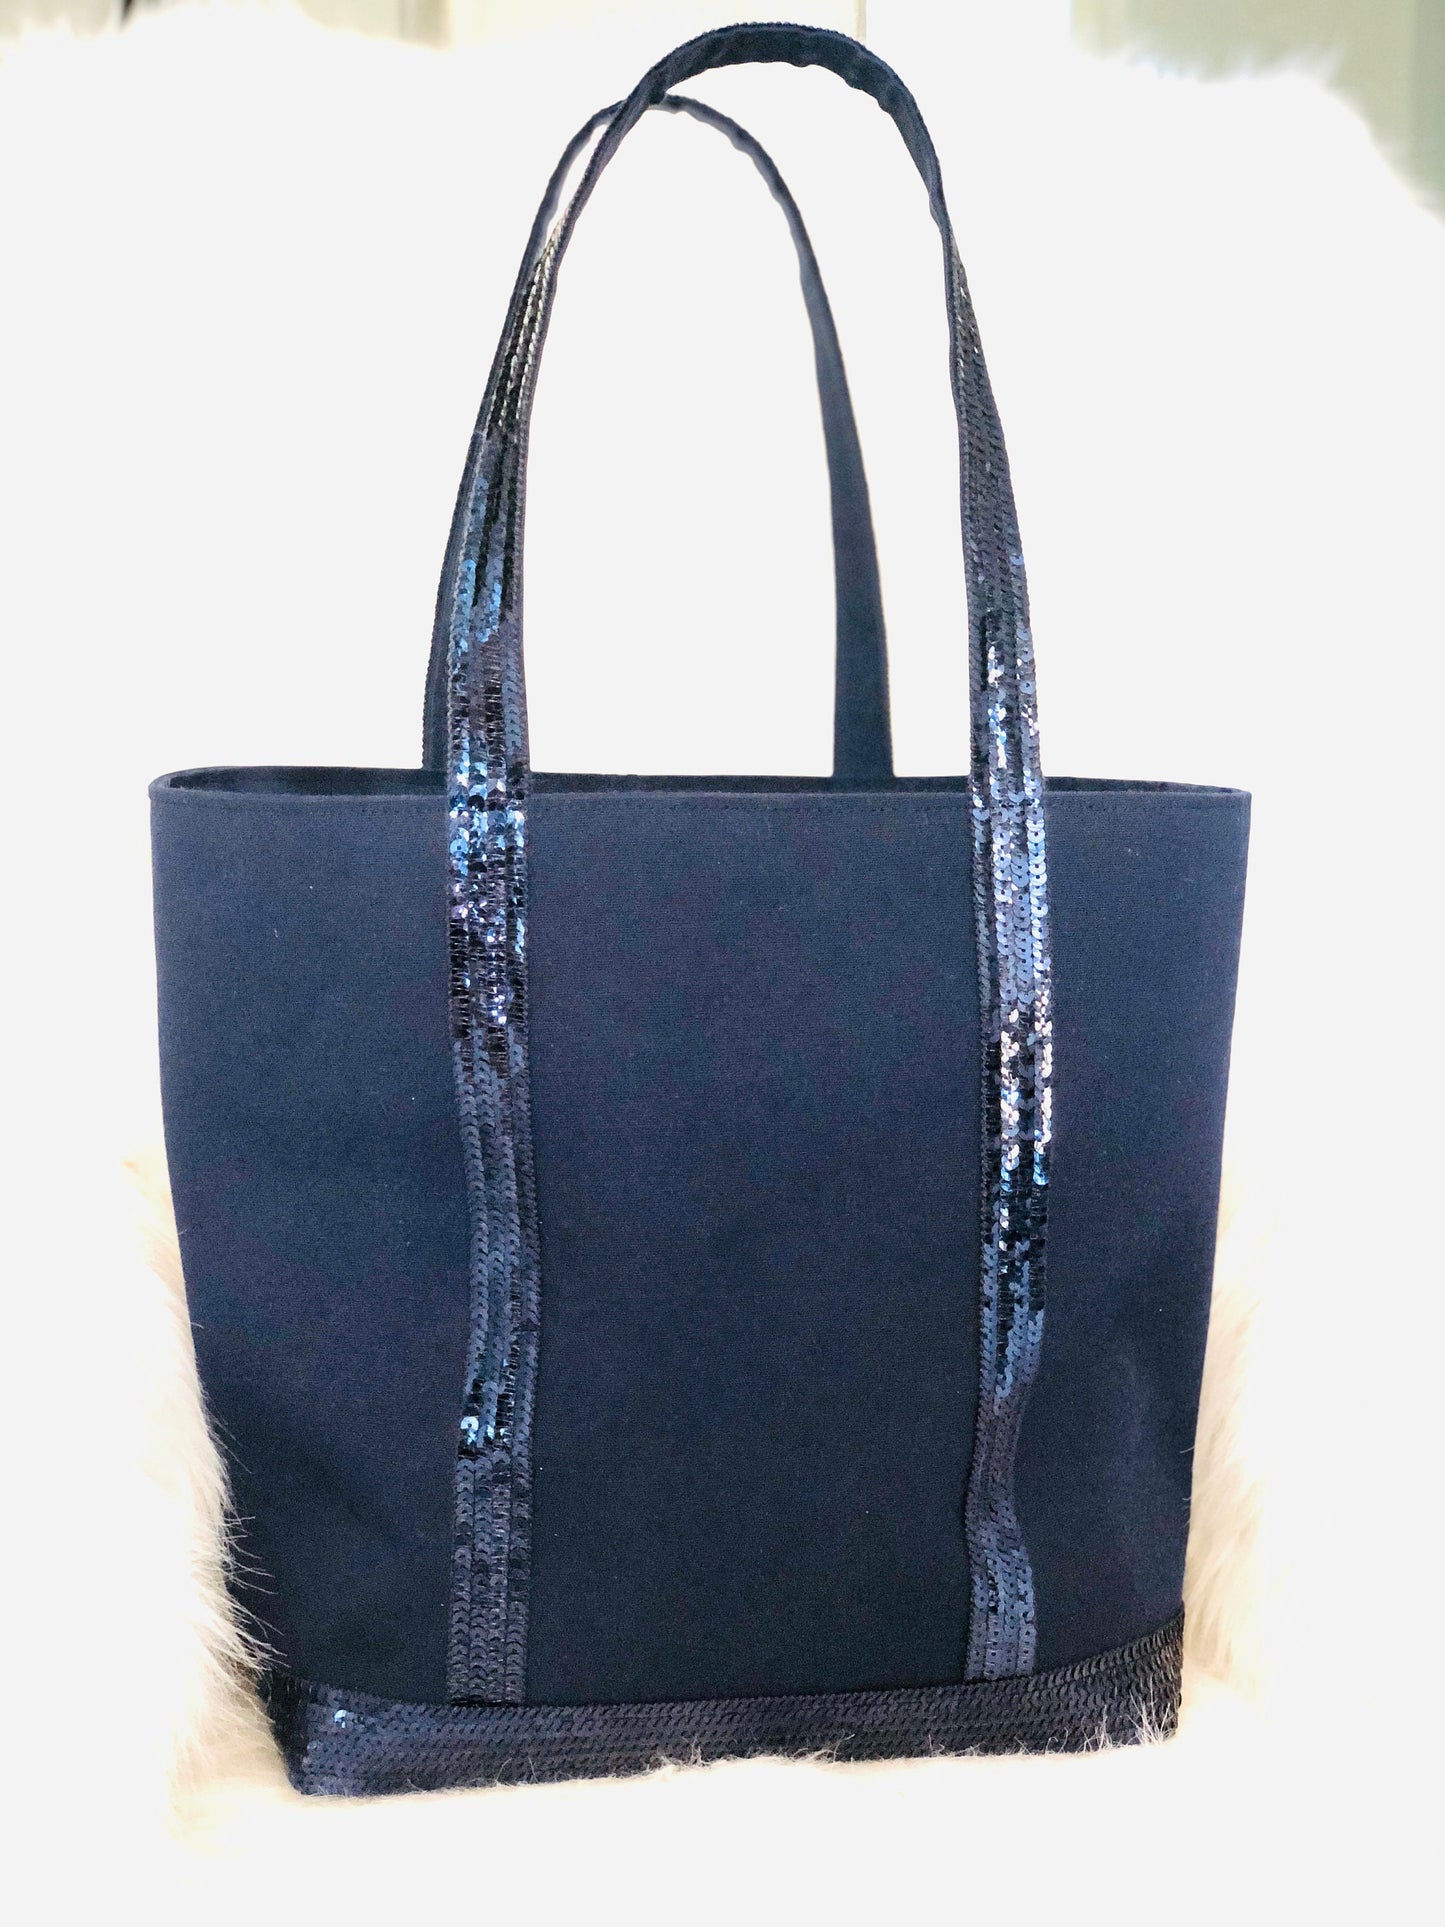 Navy blue tote bag with sequins worn on the shoulder, navy tote bag with zippered pocket, large bag for navy blue classes